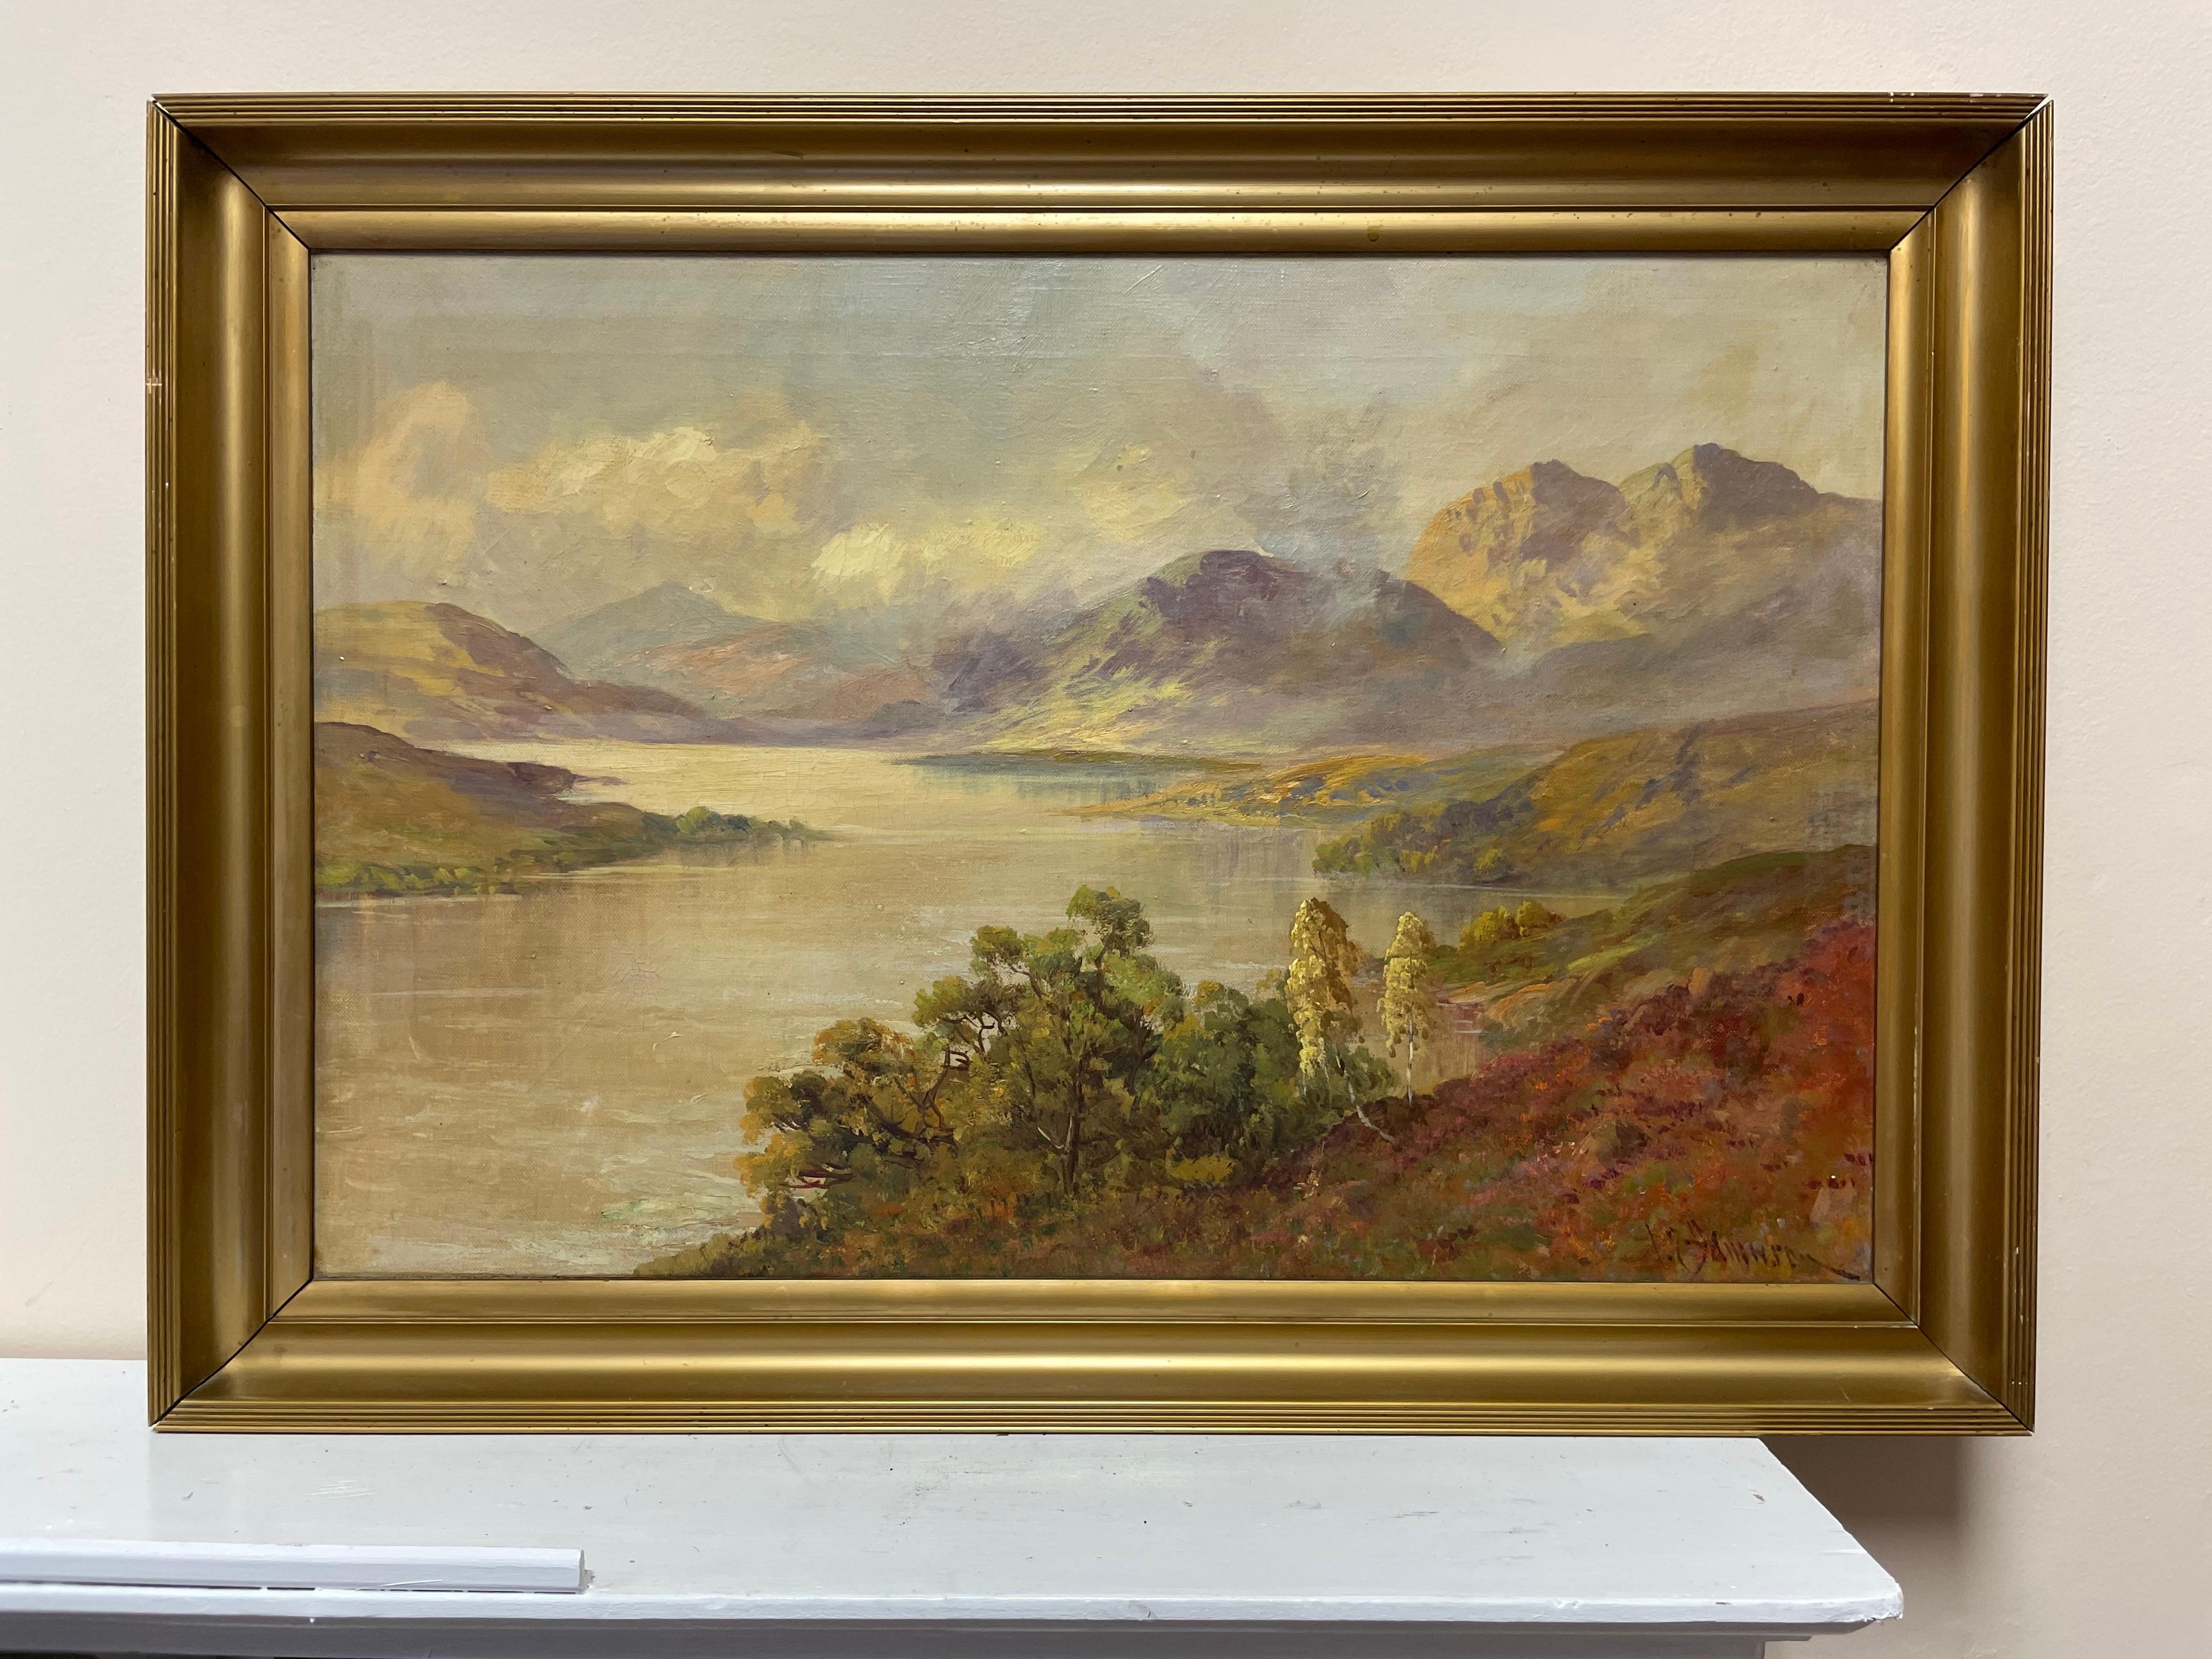 Antique Scottish Highland Loch Katrine in the Trossachs Summer Landscape - Painting by Francis E. Jamieson